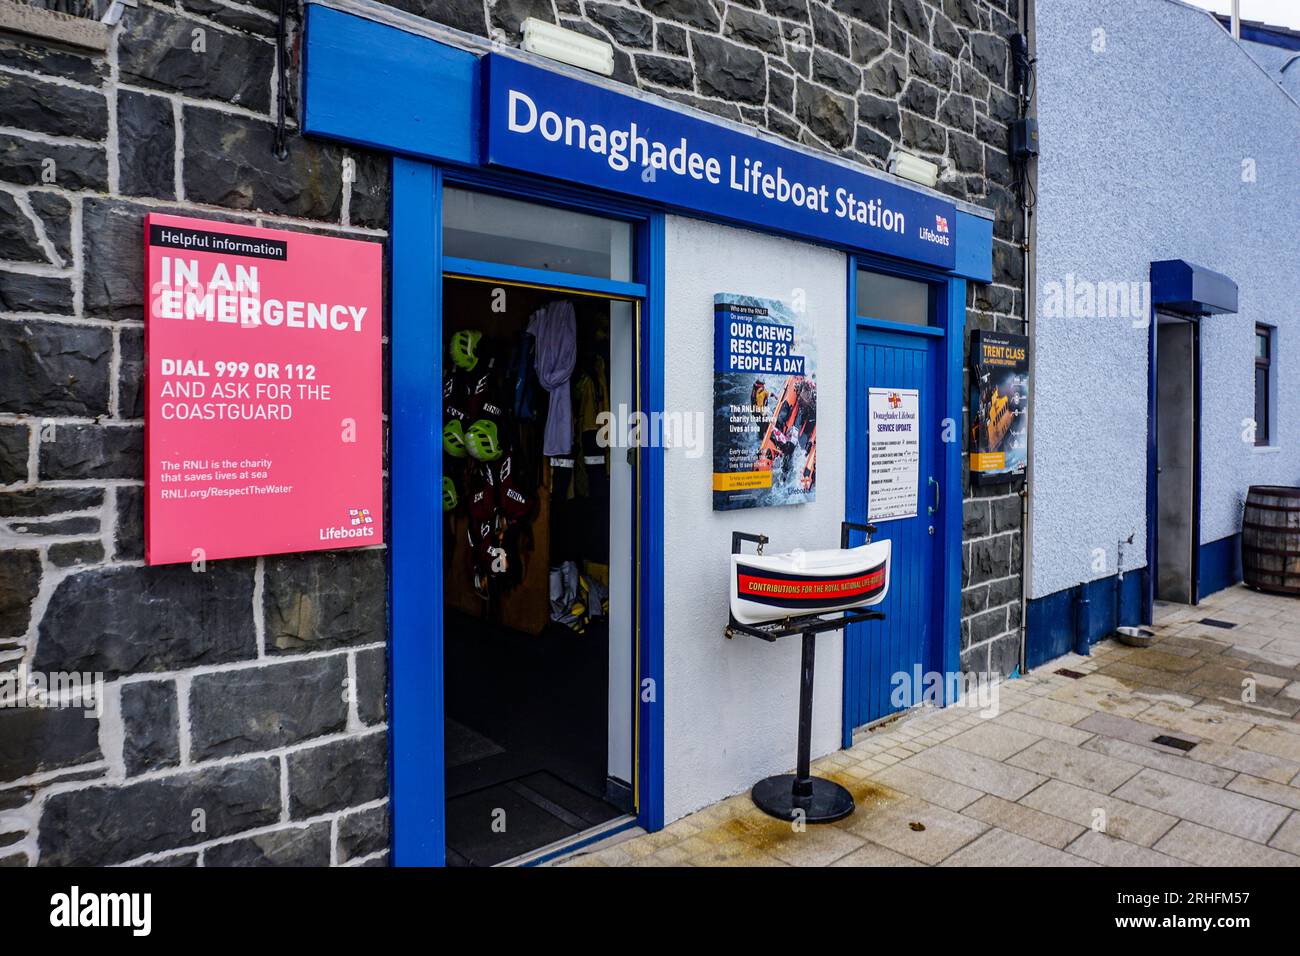 Donaghadee Lifeboat Station in County Down, Northern Ireland including the well known ship shaped contribution box. Stock Photo